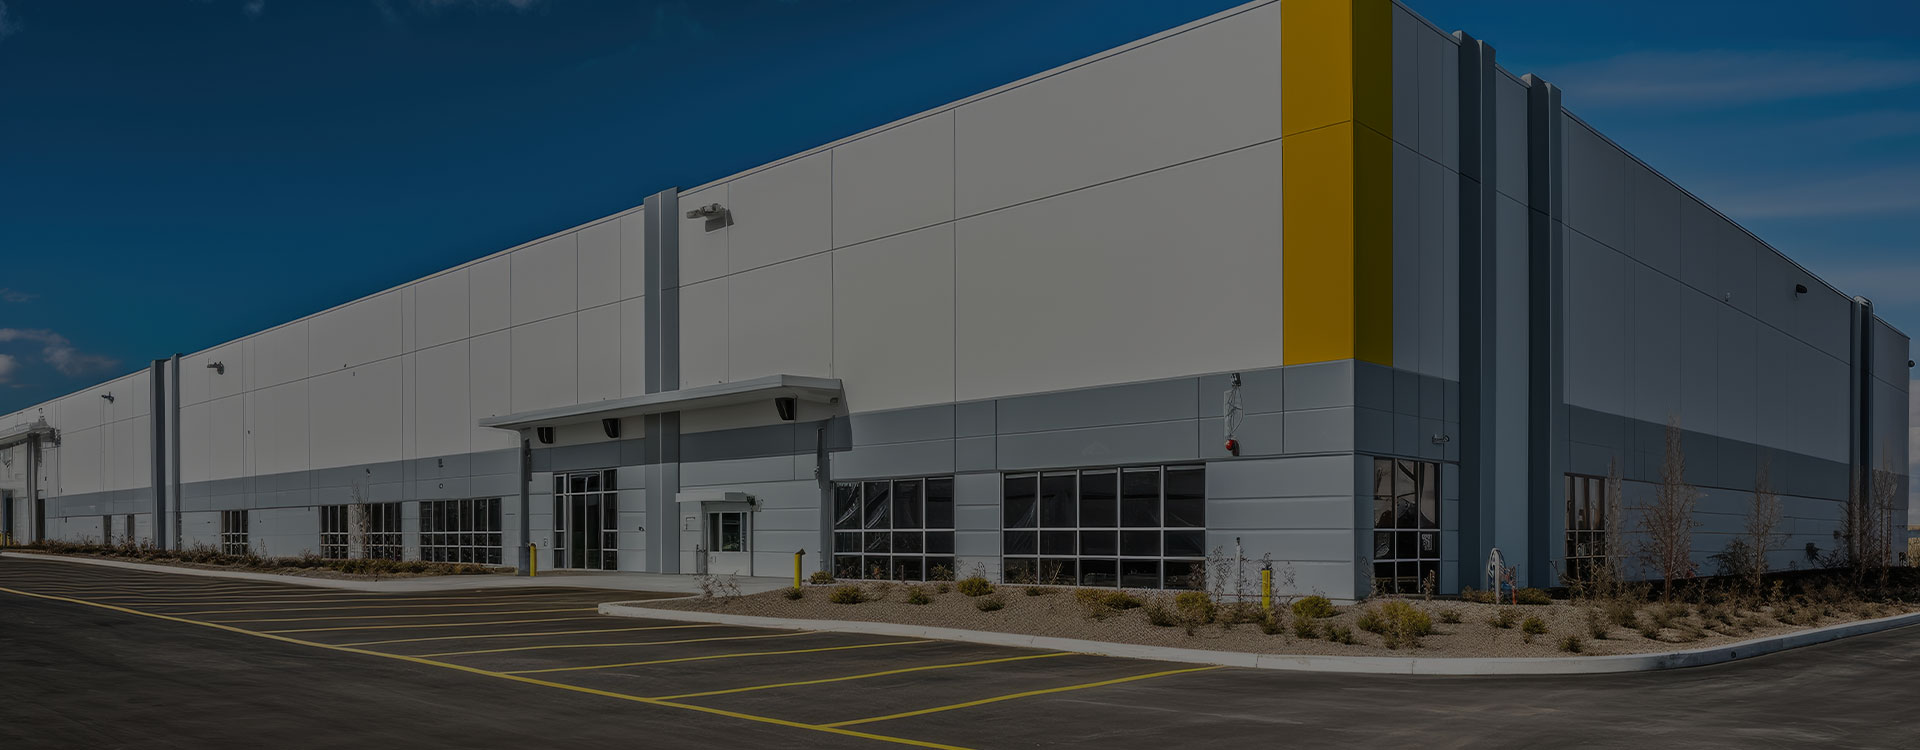 A large warehouse building with yellow accents.